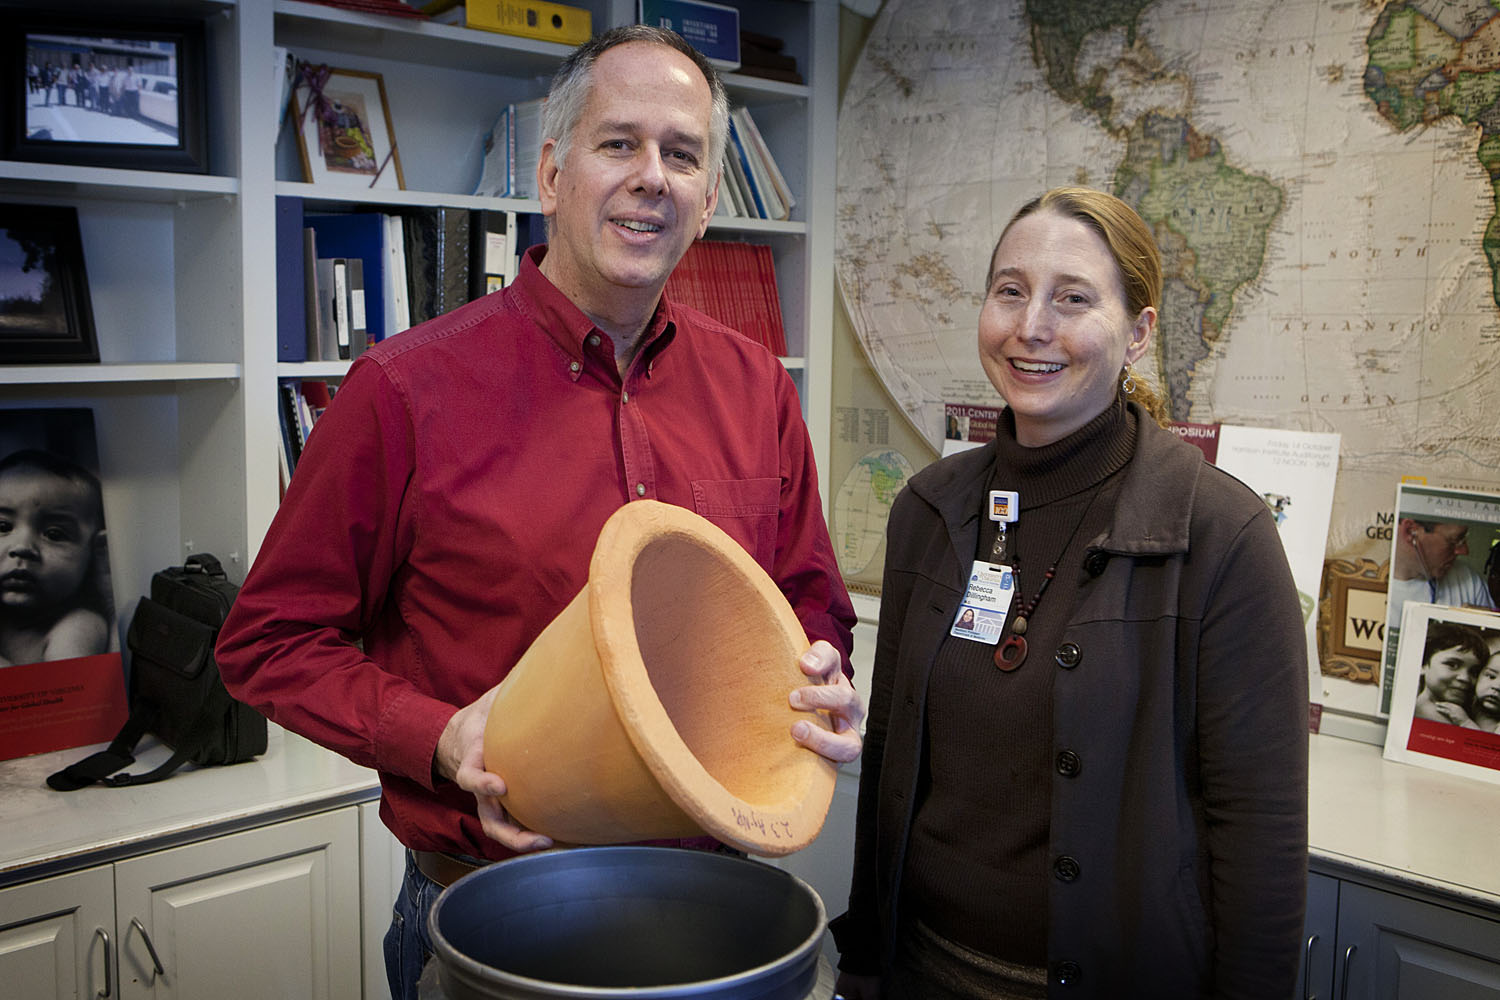 James Smith, left, holds a terracotta pot and Rebecca Dillingham stands next to him both smiling at the camera